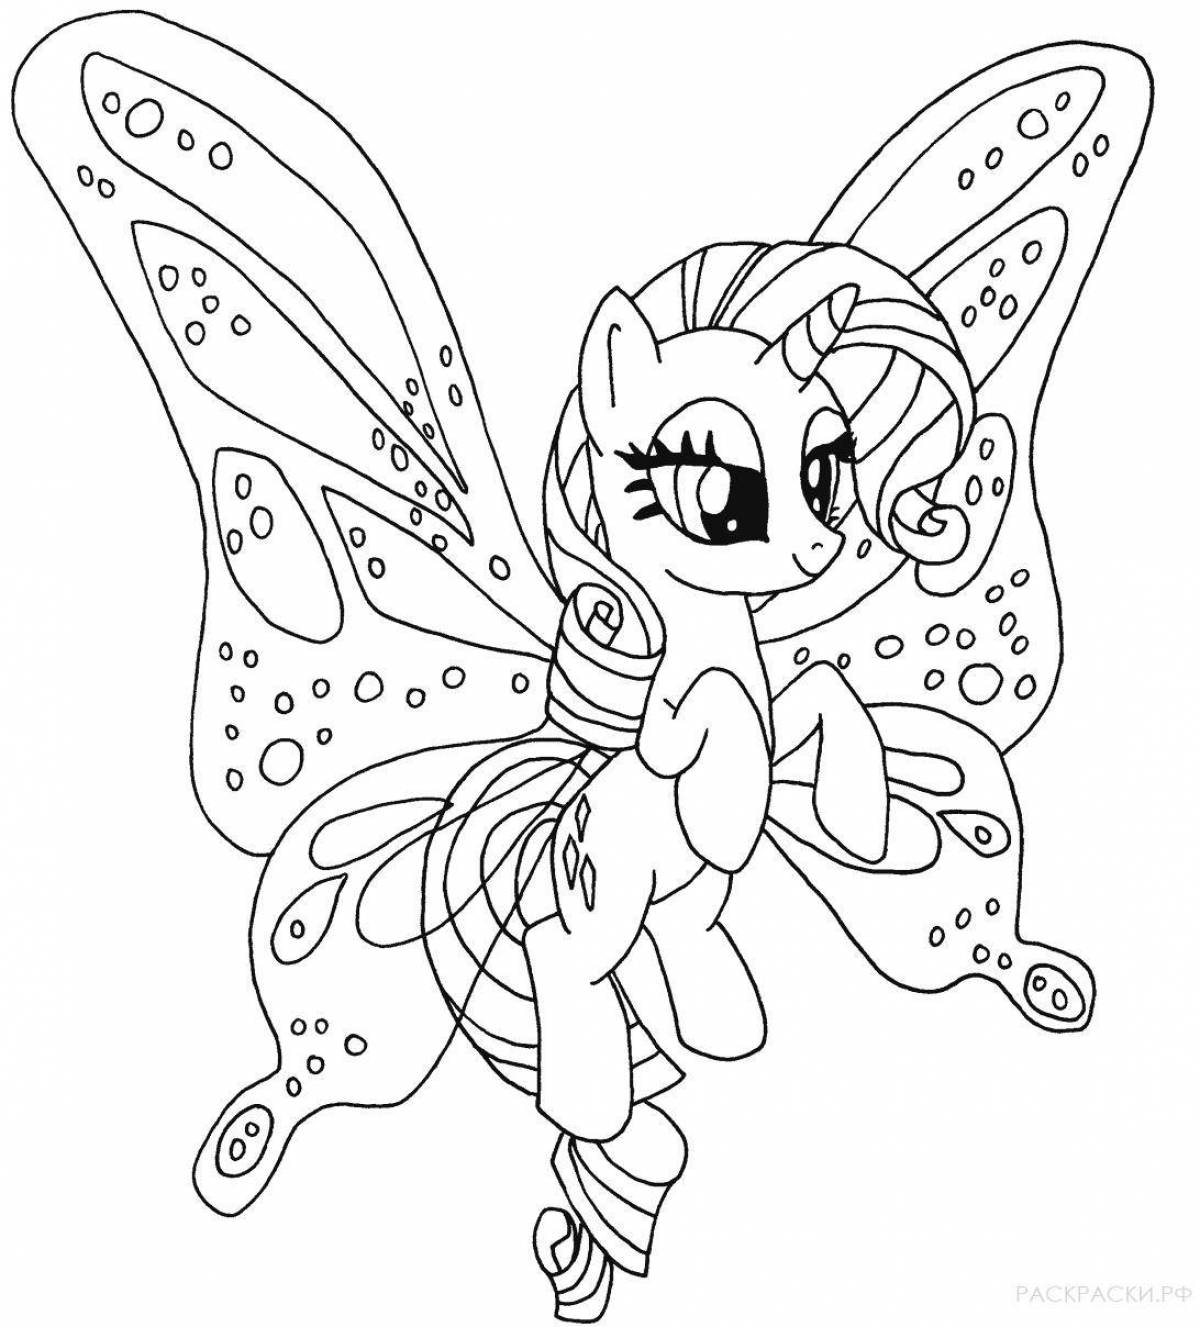 Fancy my little pony coloring book